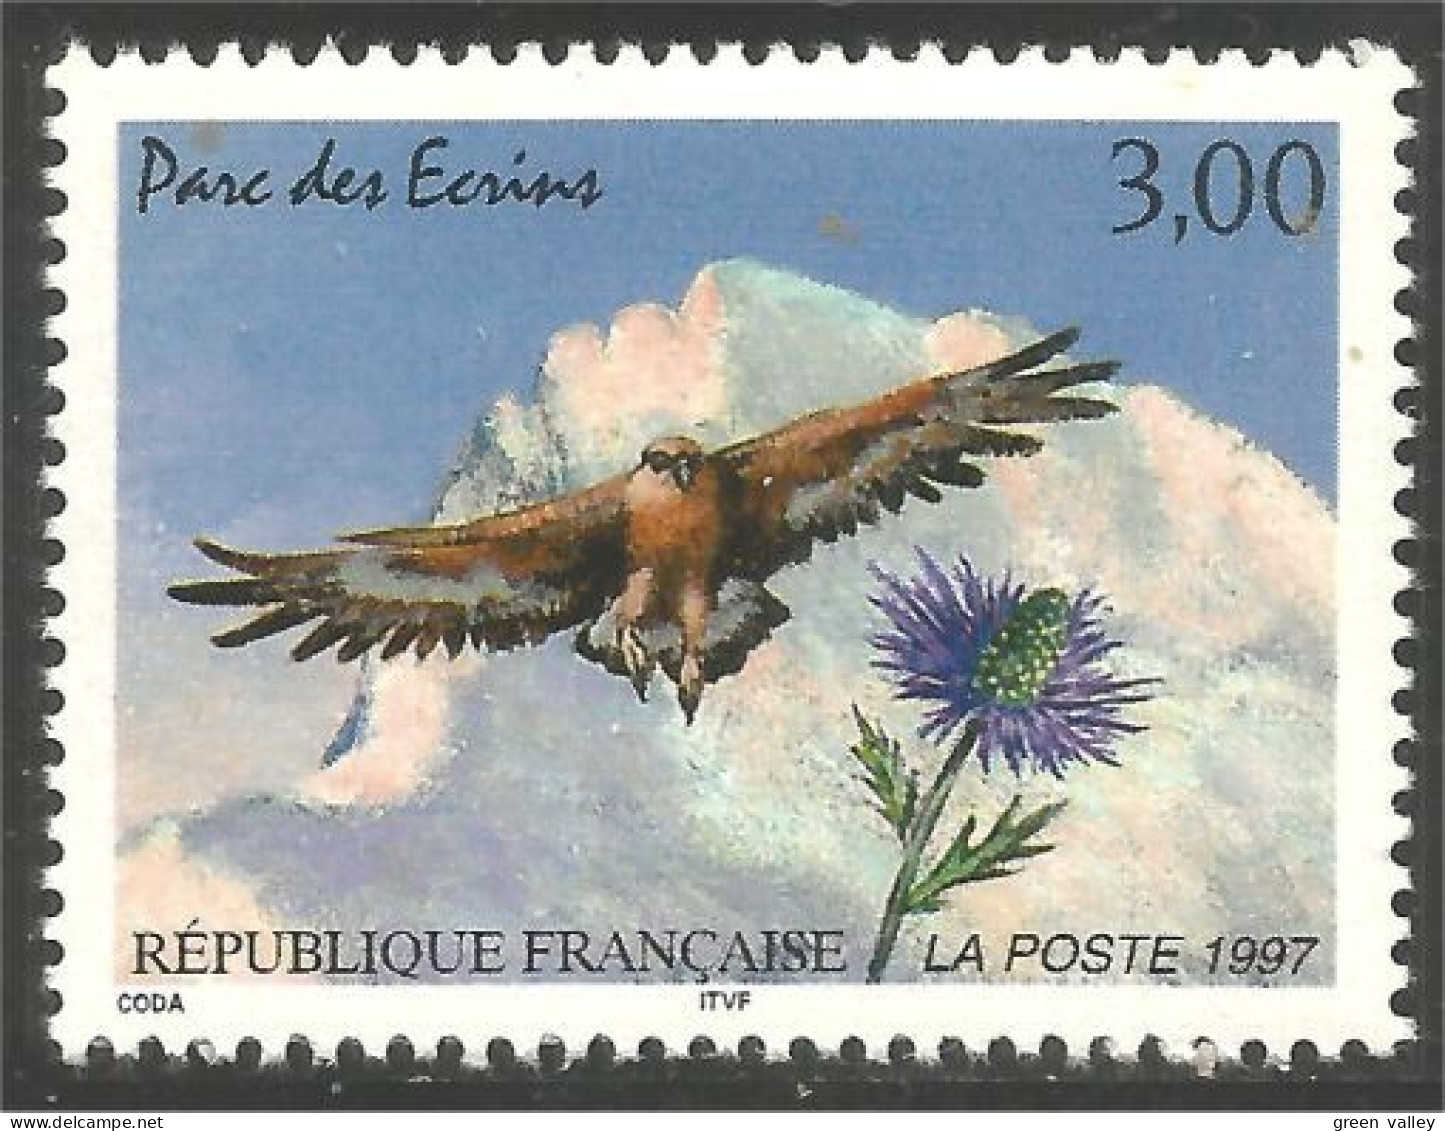 360 France Yv 3054 Ecrins Aigle Rotal Eagle Adler Aquila MNH ** Neuf SC (3054-1a) - Arends & Roofvogels